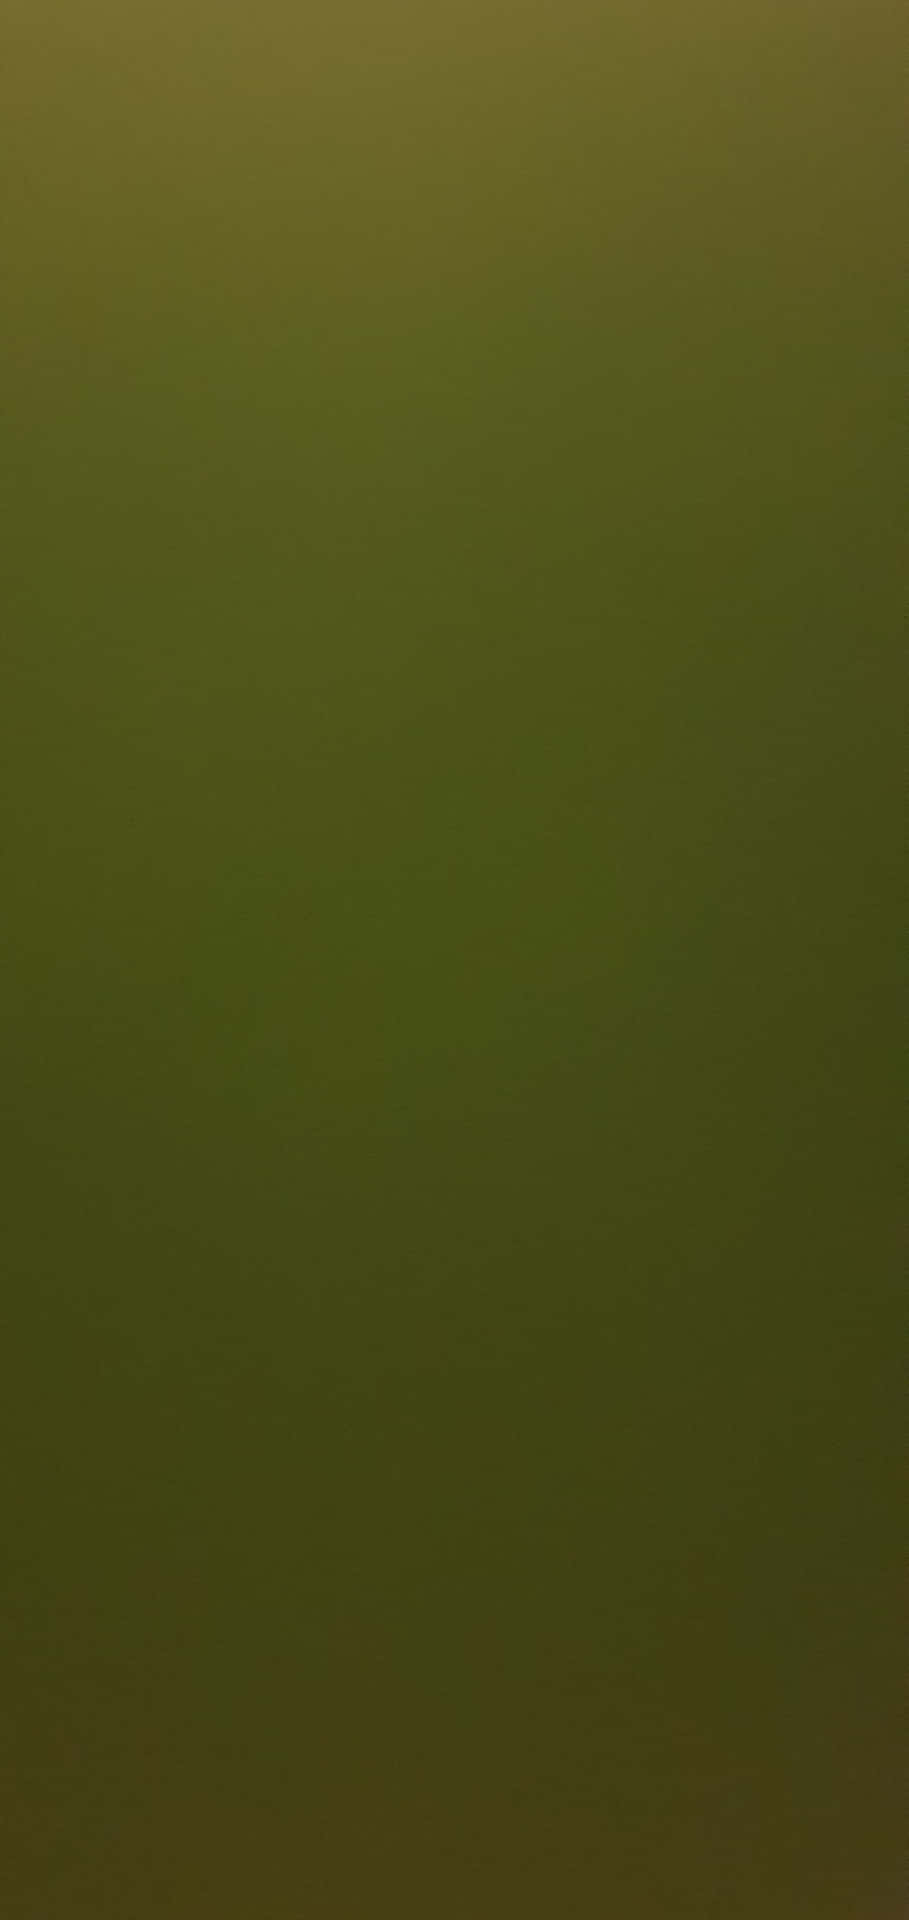 Tranquil Olive Green Abstract Background Wallpaper